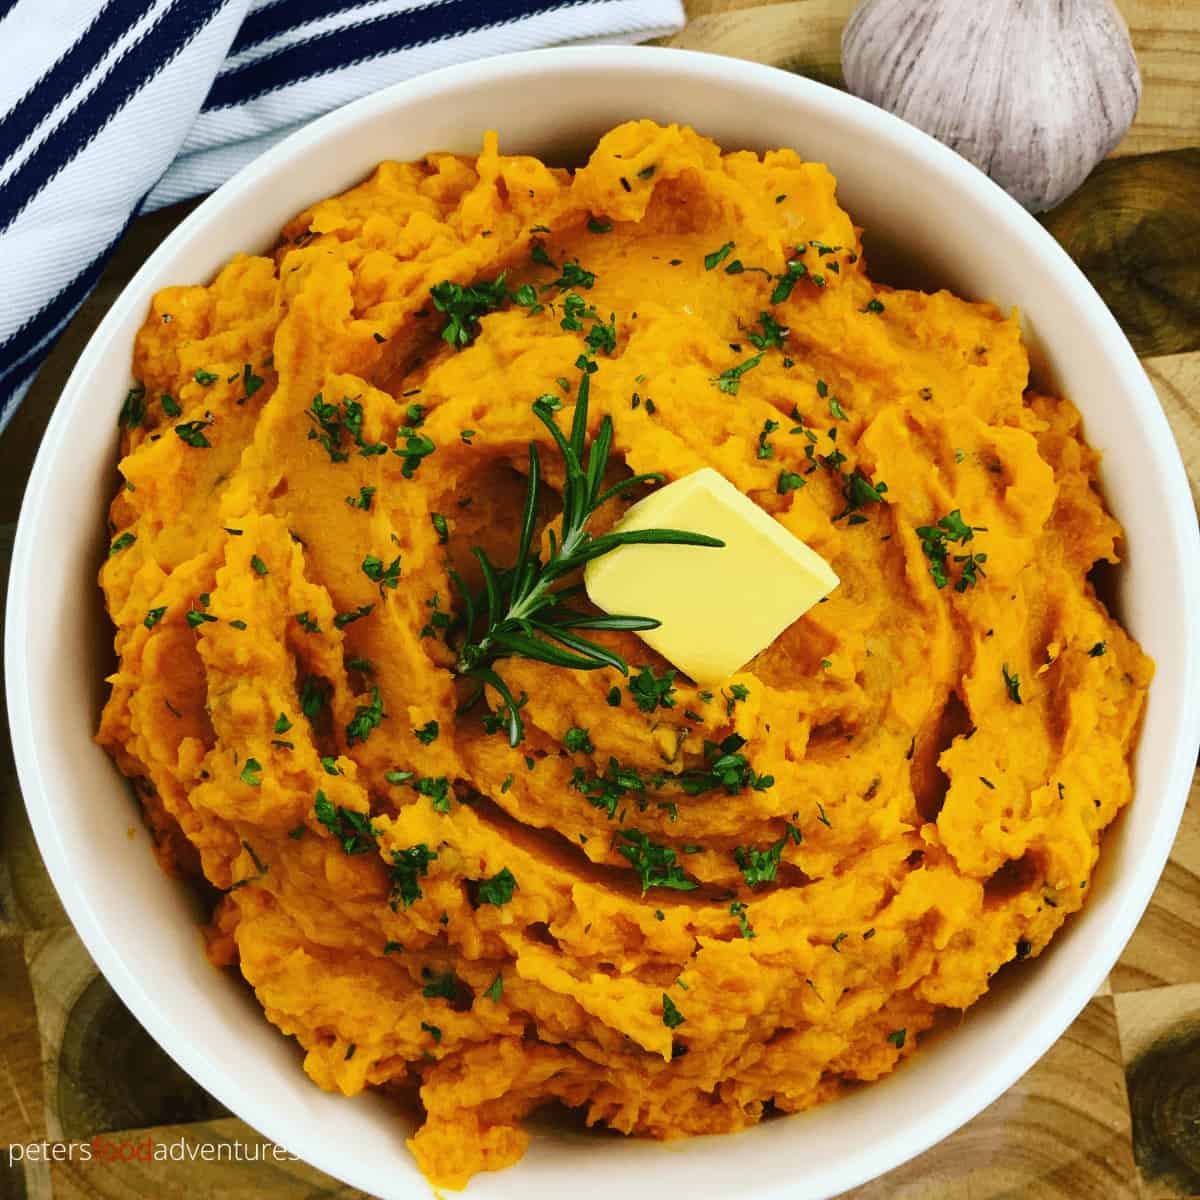 Smooth and creamy Mashed Sweet Potatoes are the perfect side dish for dinner, Thanksgiving or Christmas. Packed with flavor from fresh rosemary and garlic, quick, easy and healthy.